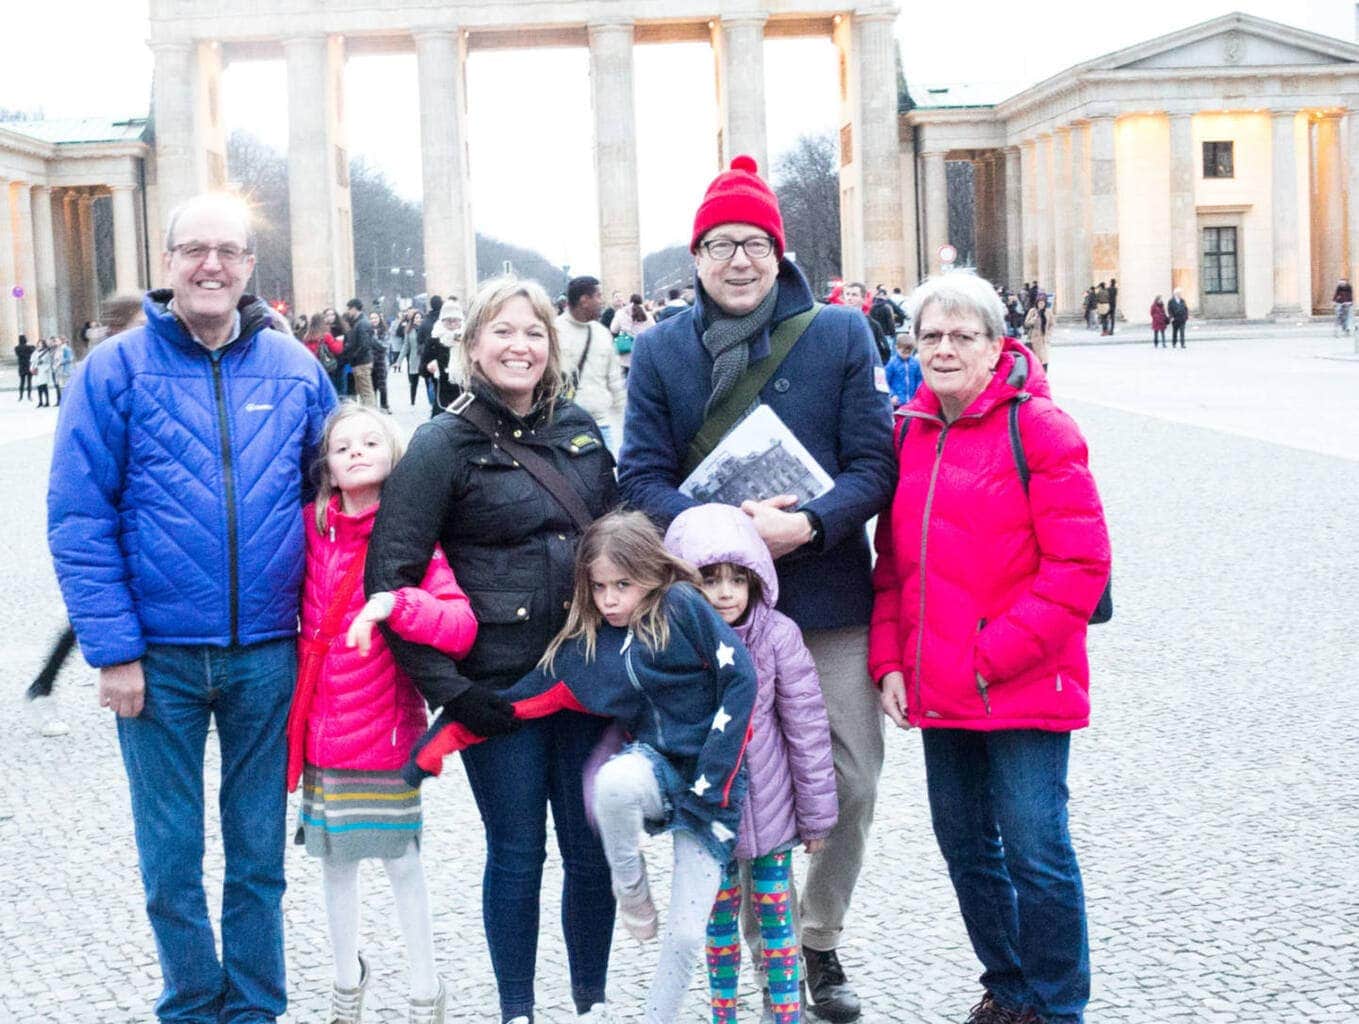 Family Friendly Tour of Berlin with Tours by Locals